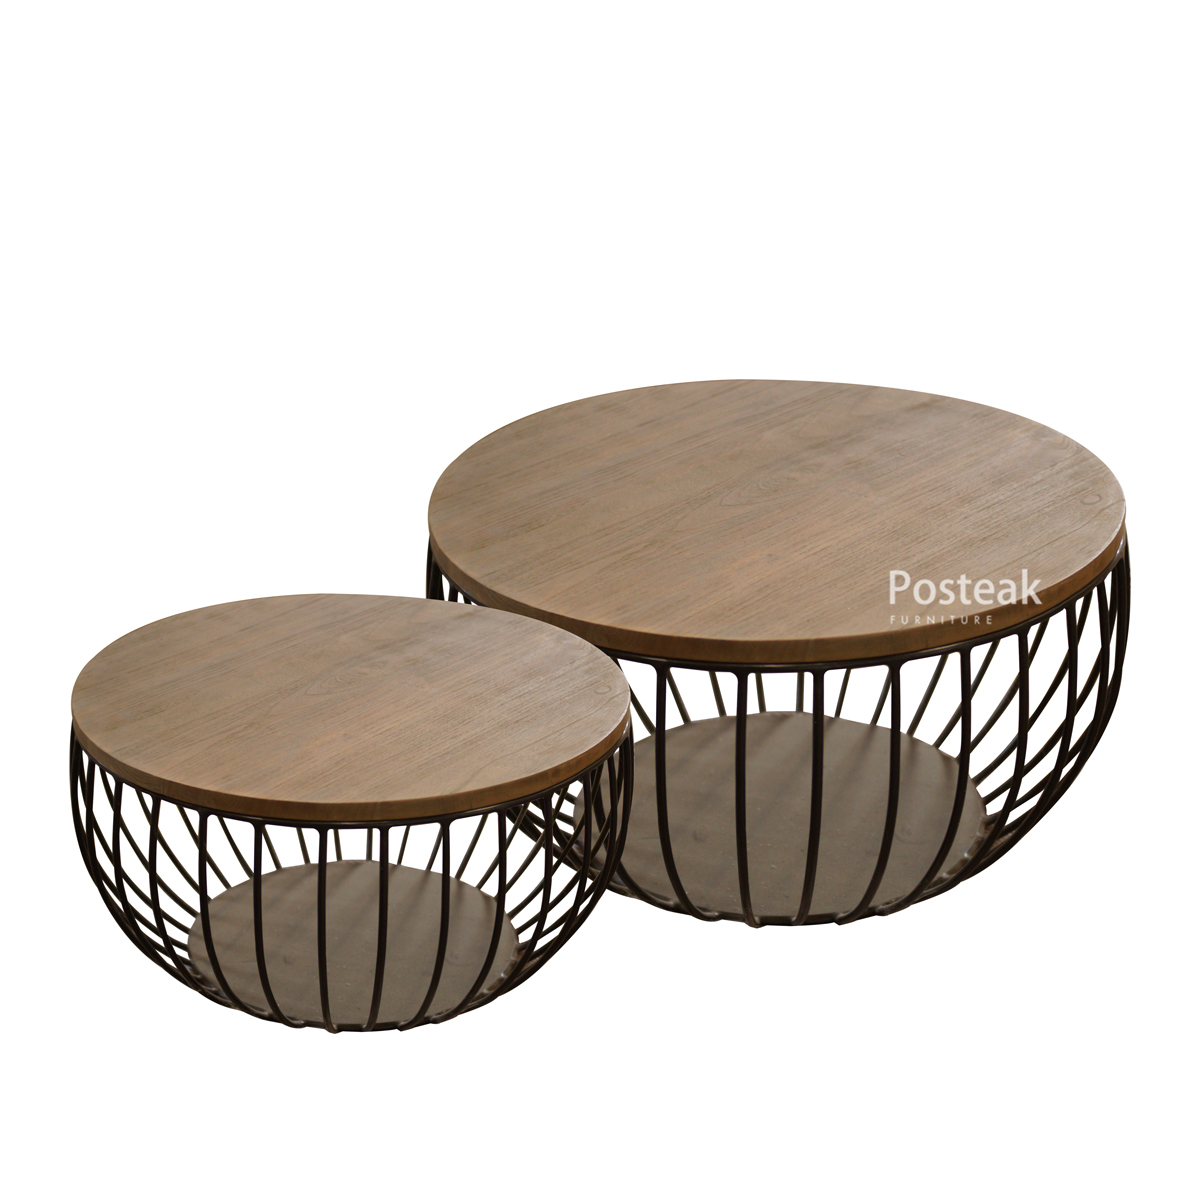 Round Industrial Coffee Table Posteak, Industrial Round Side Table